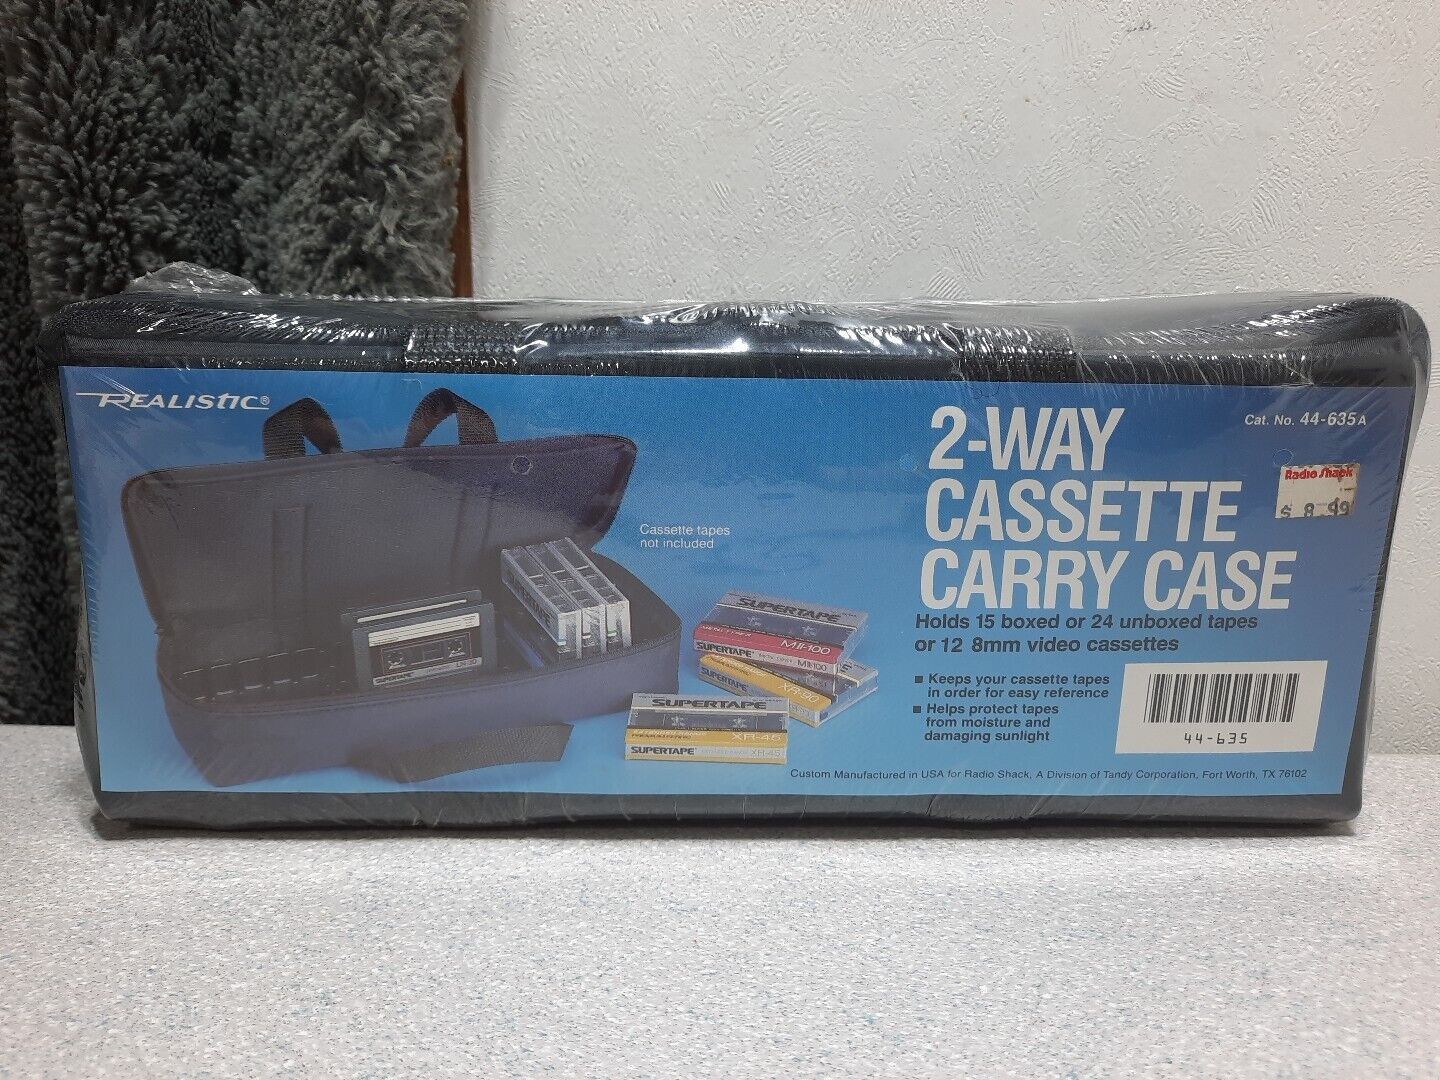 New Sealed Vintage Realistic Radio Shack  15 Cassette Carry Case Cat no 44-635A 